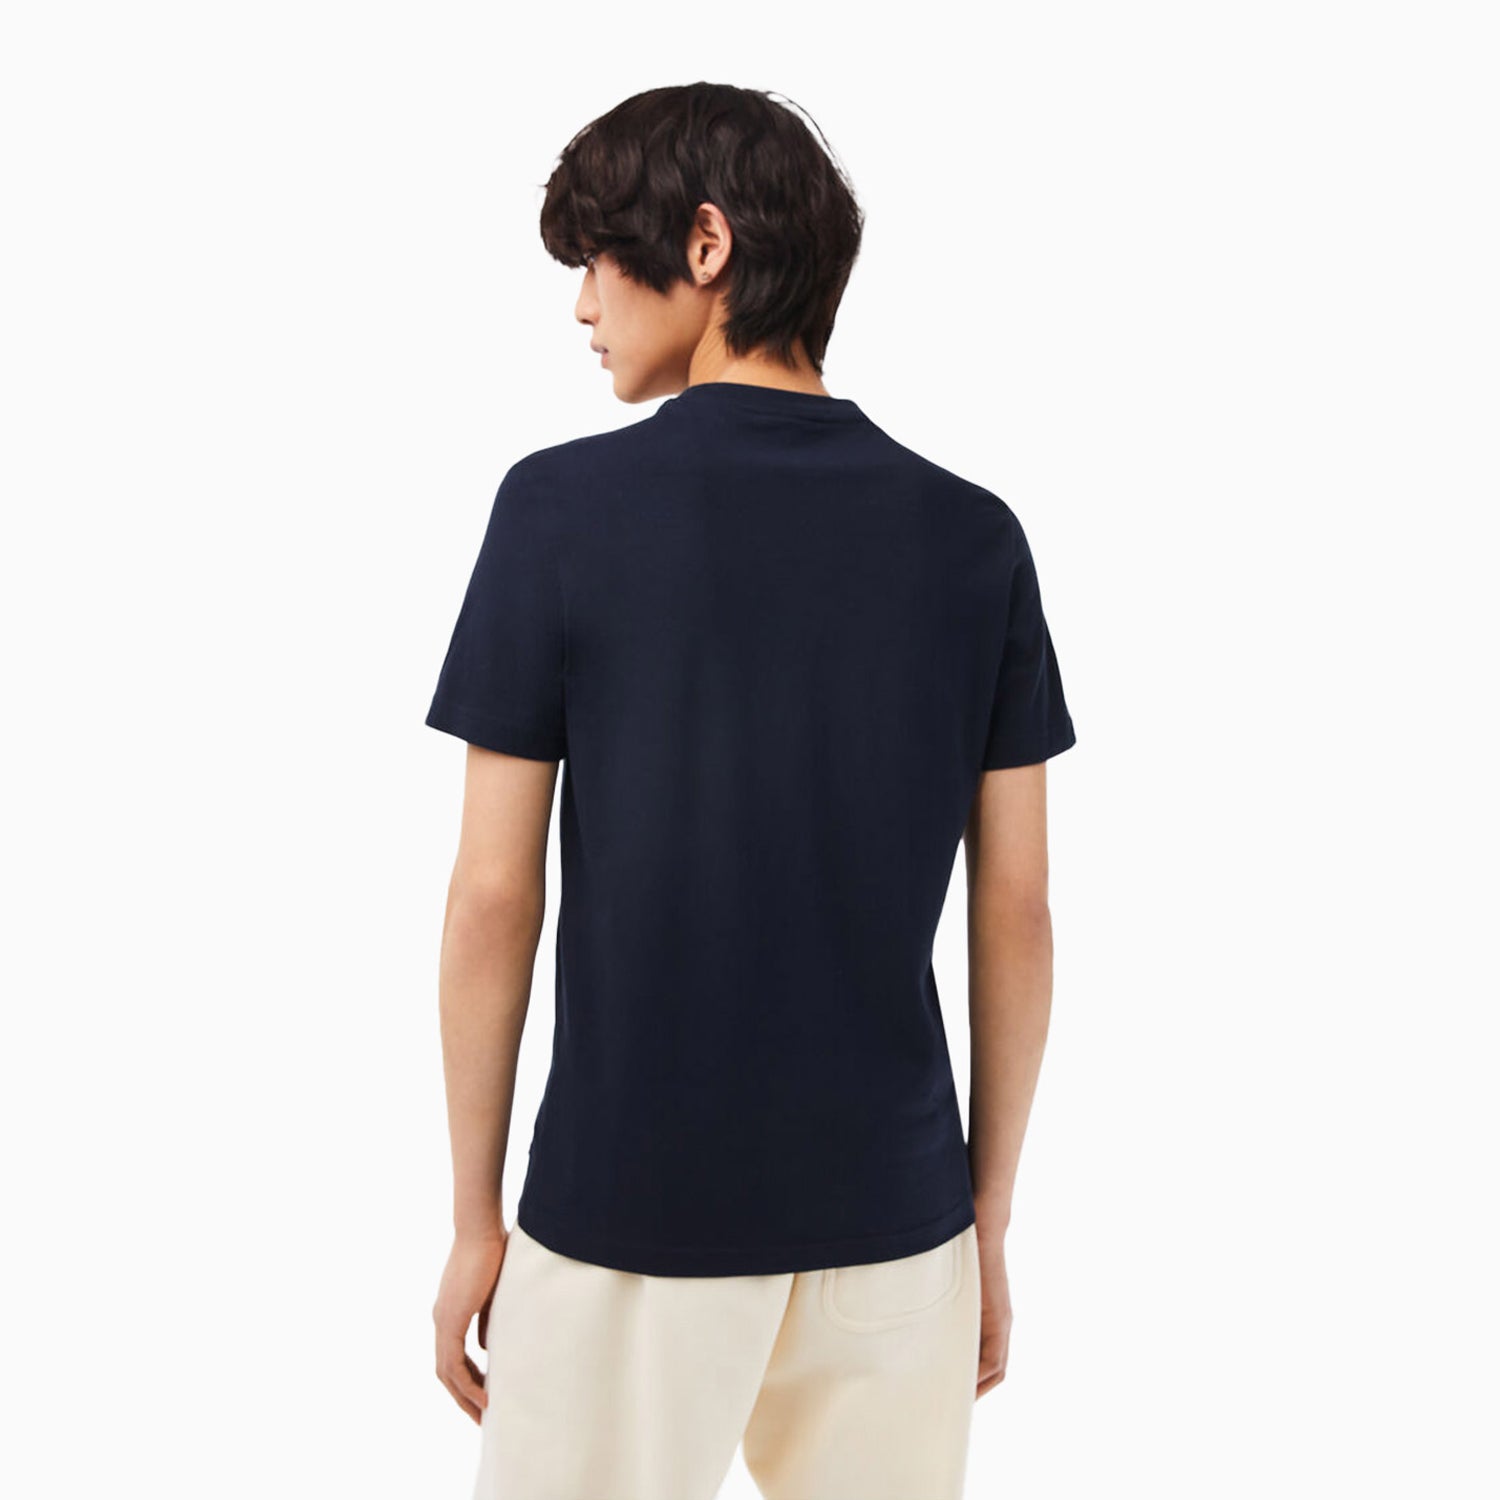 mens-lacoste-cotton-outfit-th5070-166-gh5086-51-166